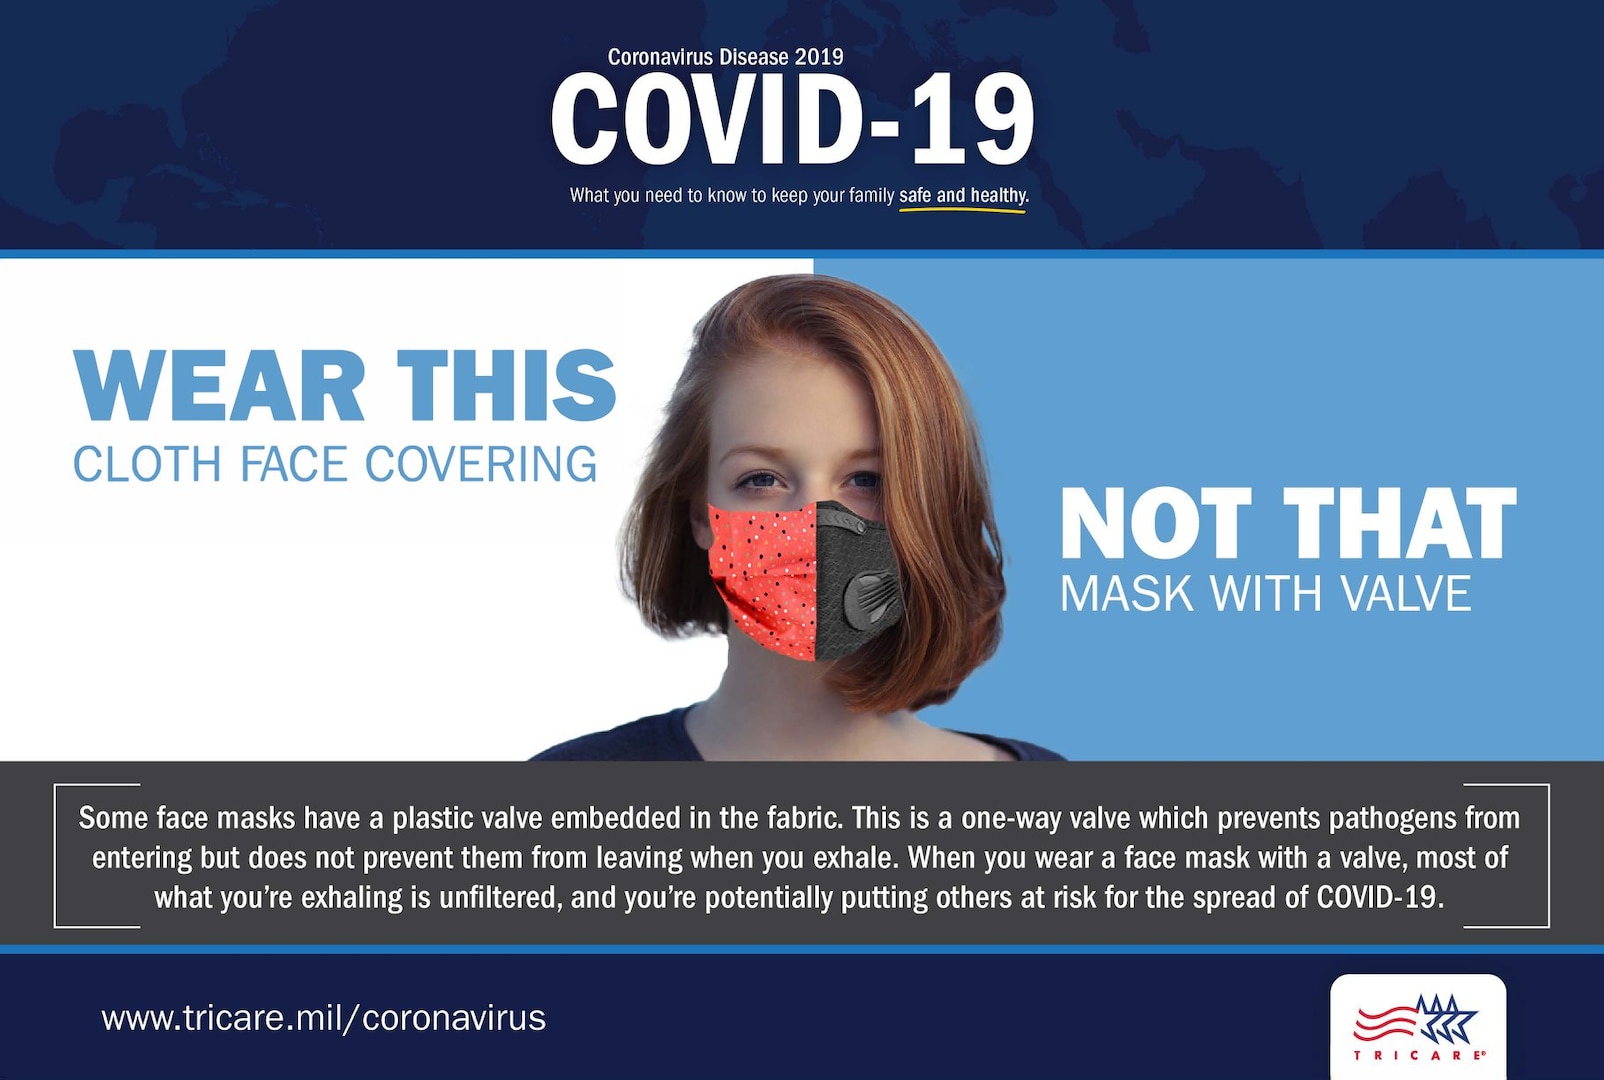 How masks can help prevent COVID-19